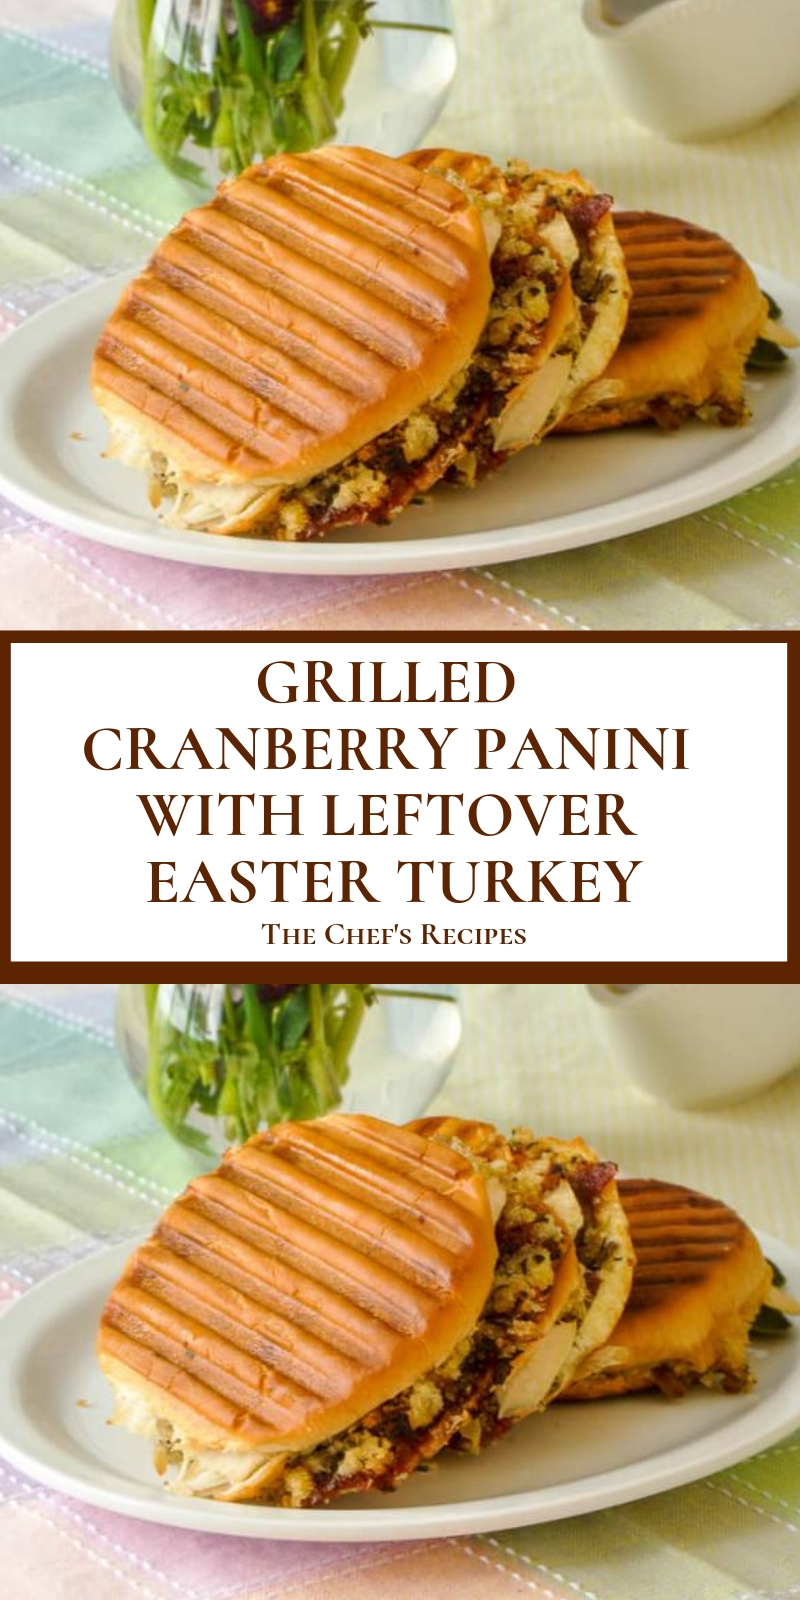 GRILLED CRANBERRY PANINI WITH LEFTOVER EASTER TURKEY